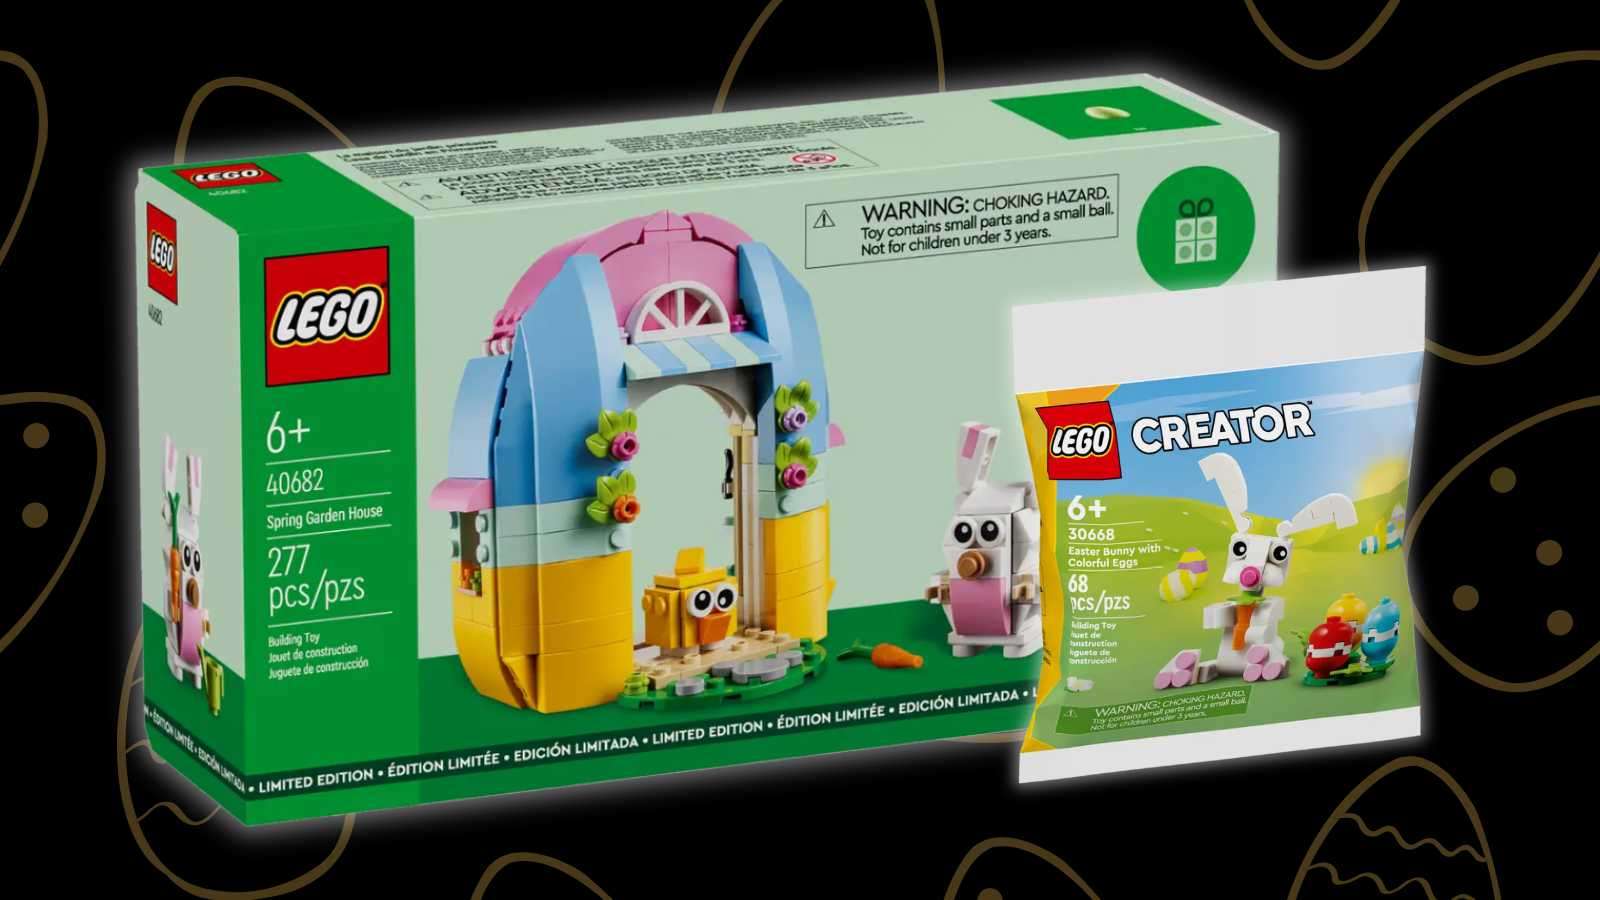 The two LEGO sets LEGO is offering for free this Easter